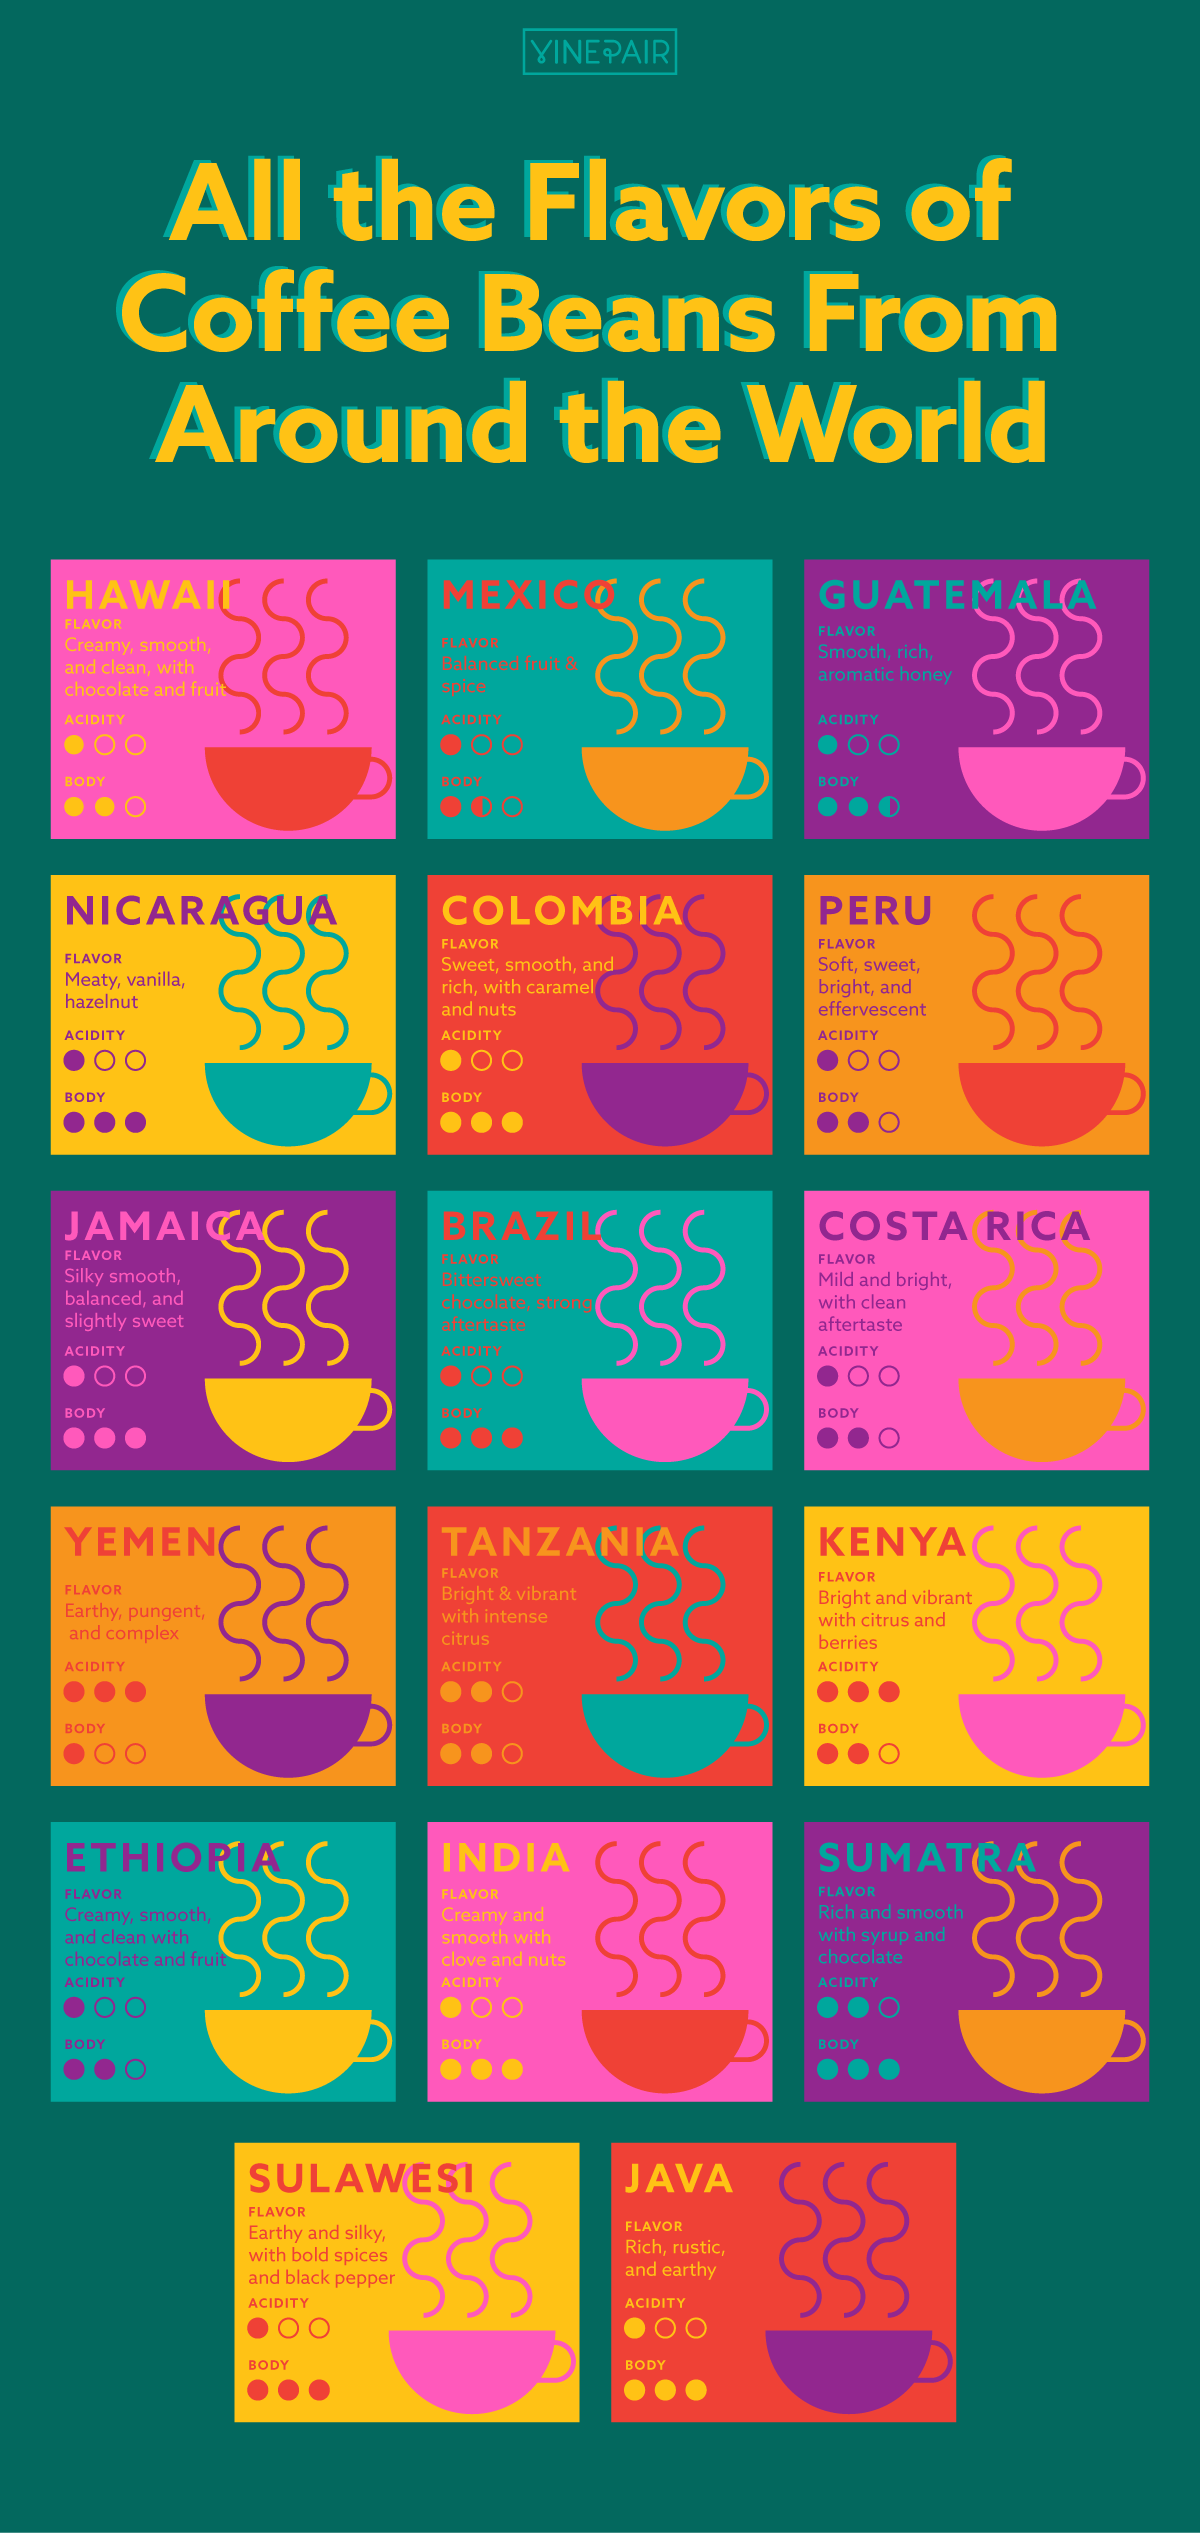 All the flavors of coffee beans from around the world